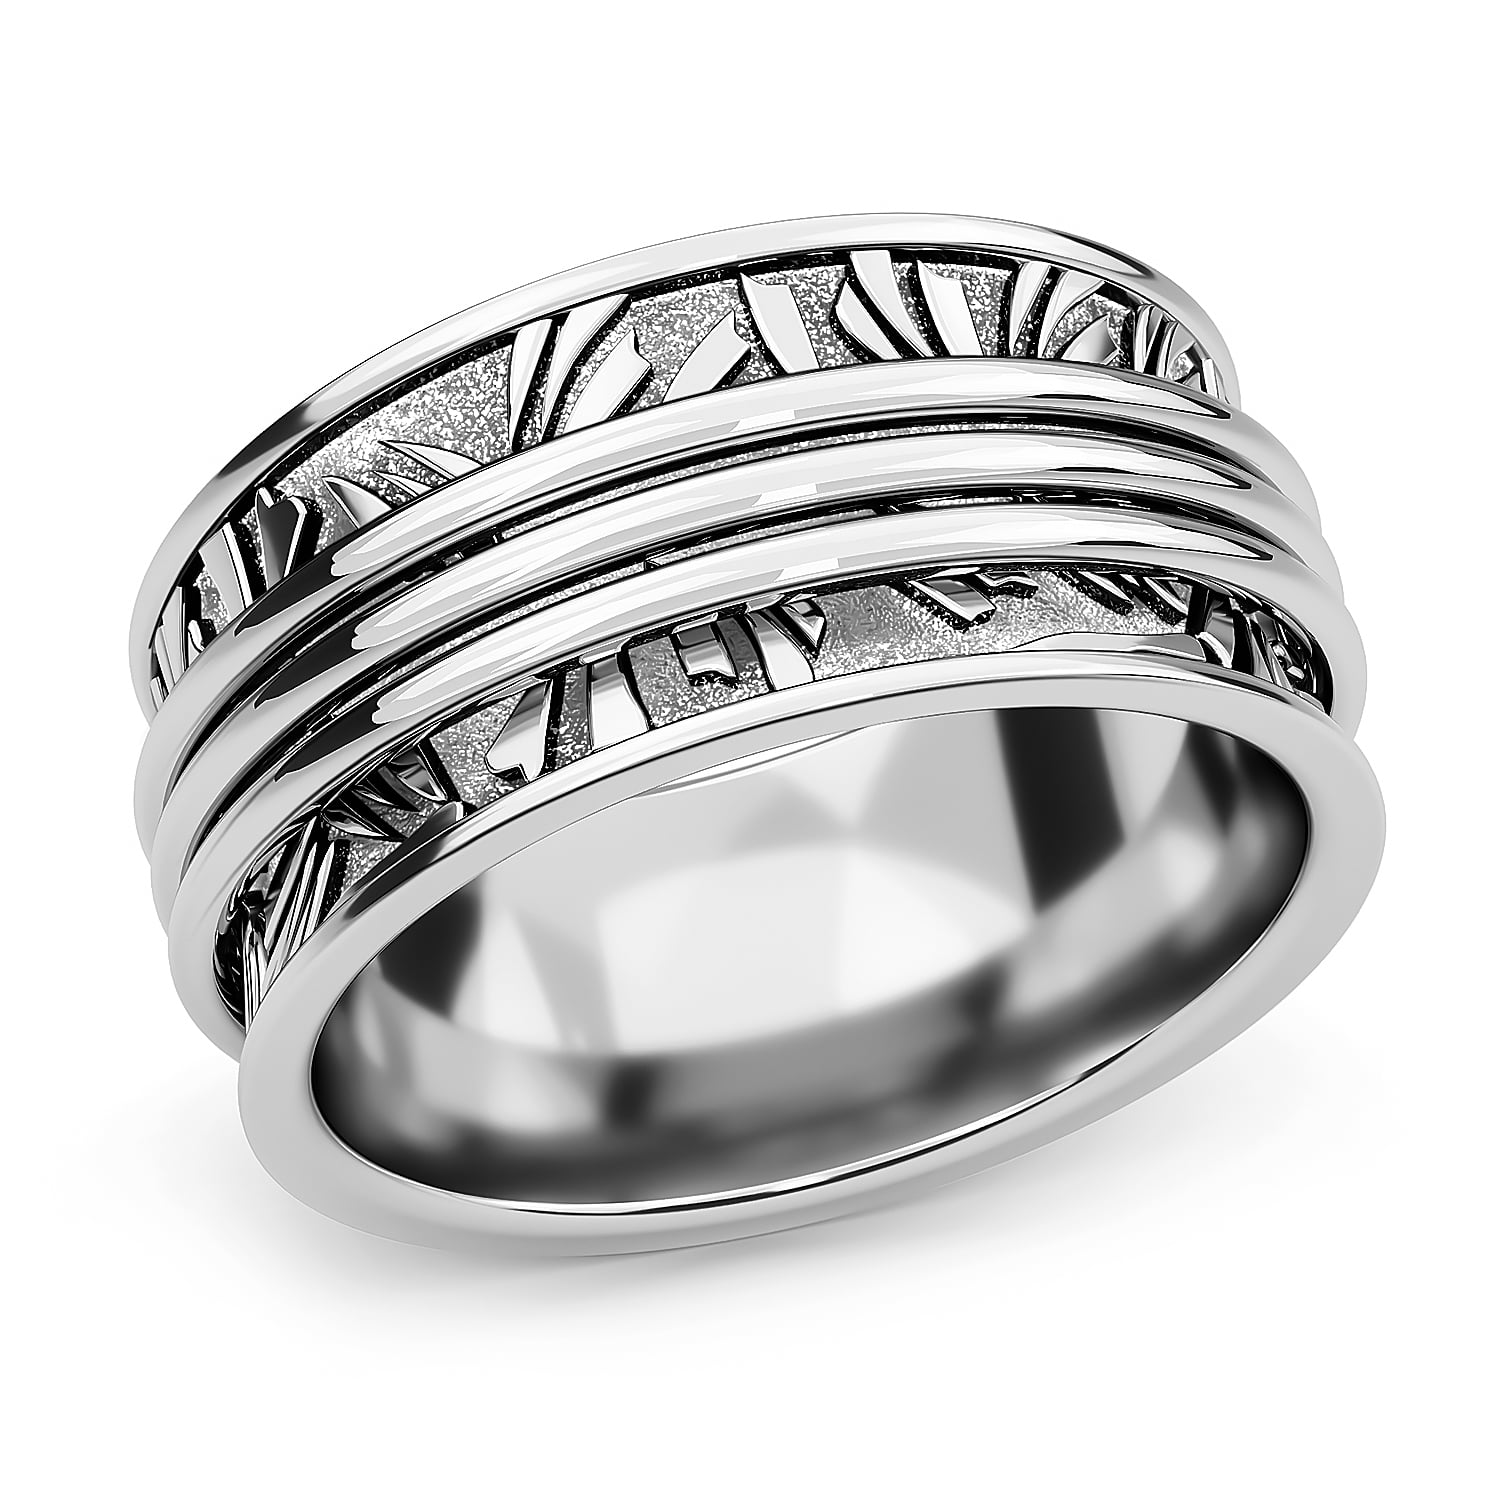 Stainless Steel Braid Wave Knot Crown Style Wedding Statement Party Anniversary Ring